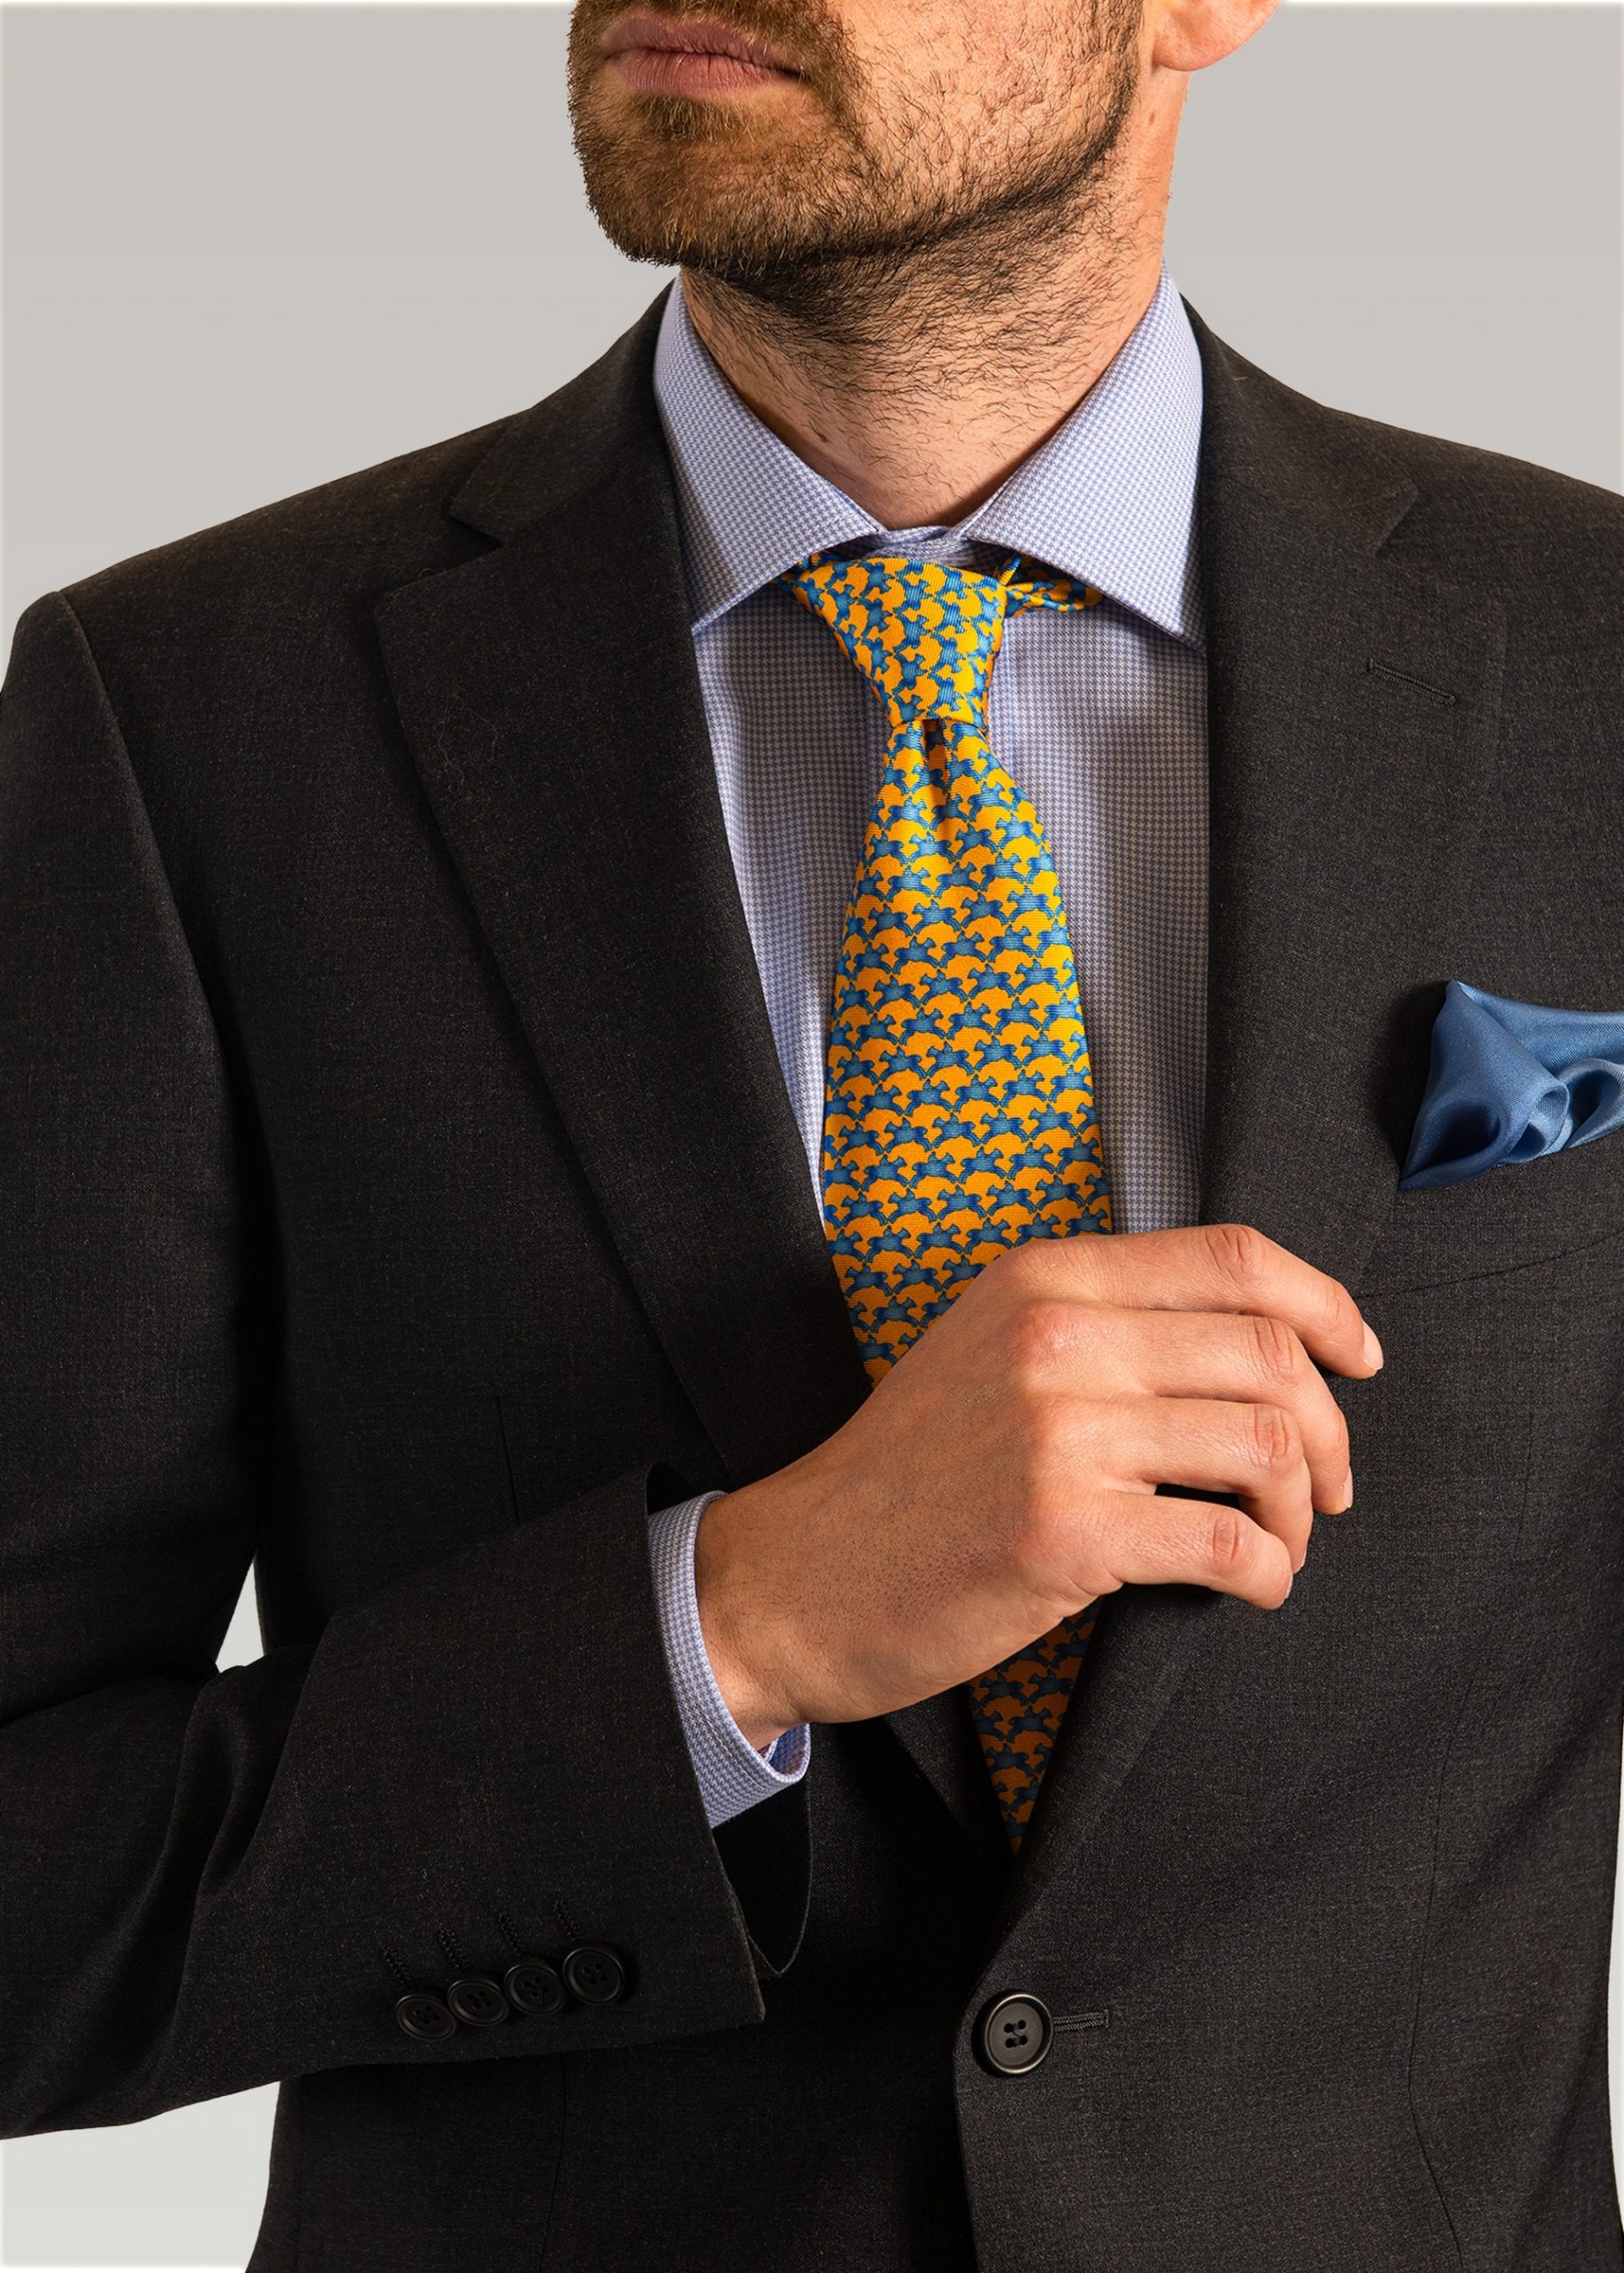 Plain grey men’s suit worn with blue gingham shirt and yellow horse tie